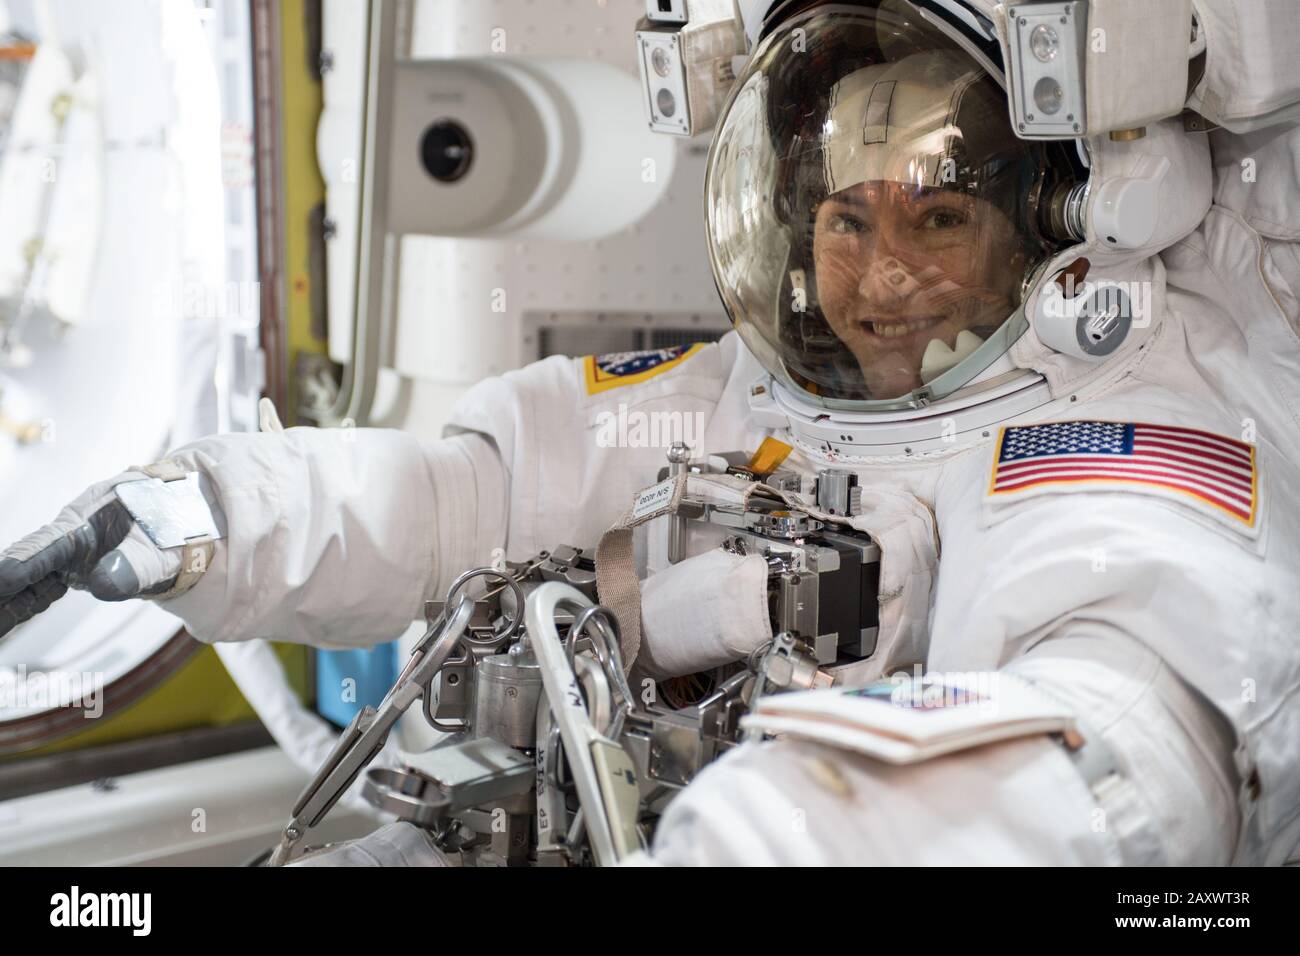 ISS - 6 Oct 2019 - NASA astronaut Christina Koch is suited up in a U.S. spacesuit before beginning a seven hour and one minute spacewalk to upgrade th Stock Photo